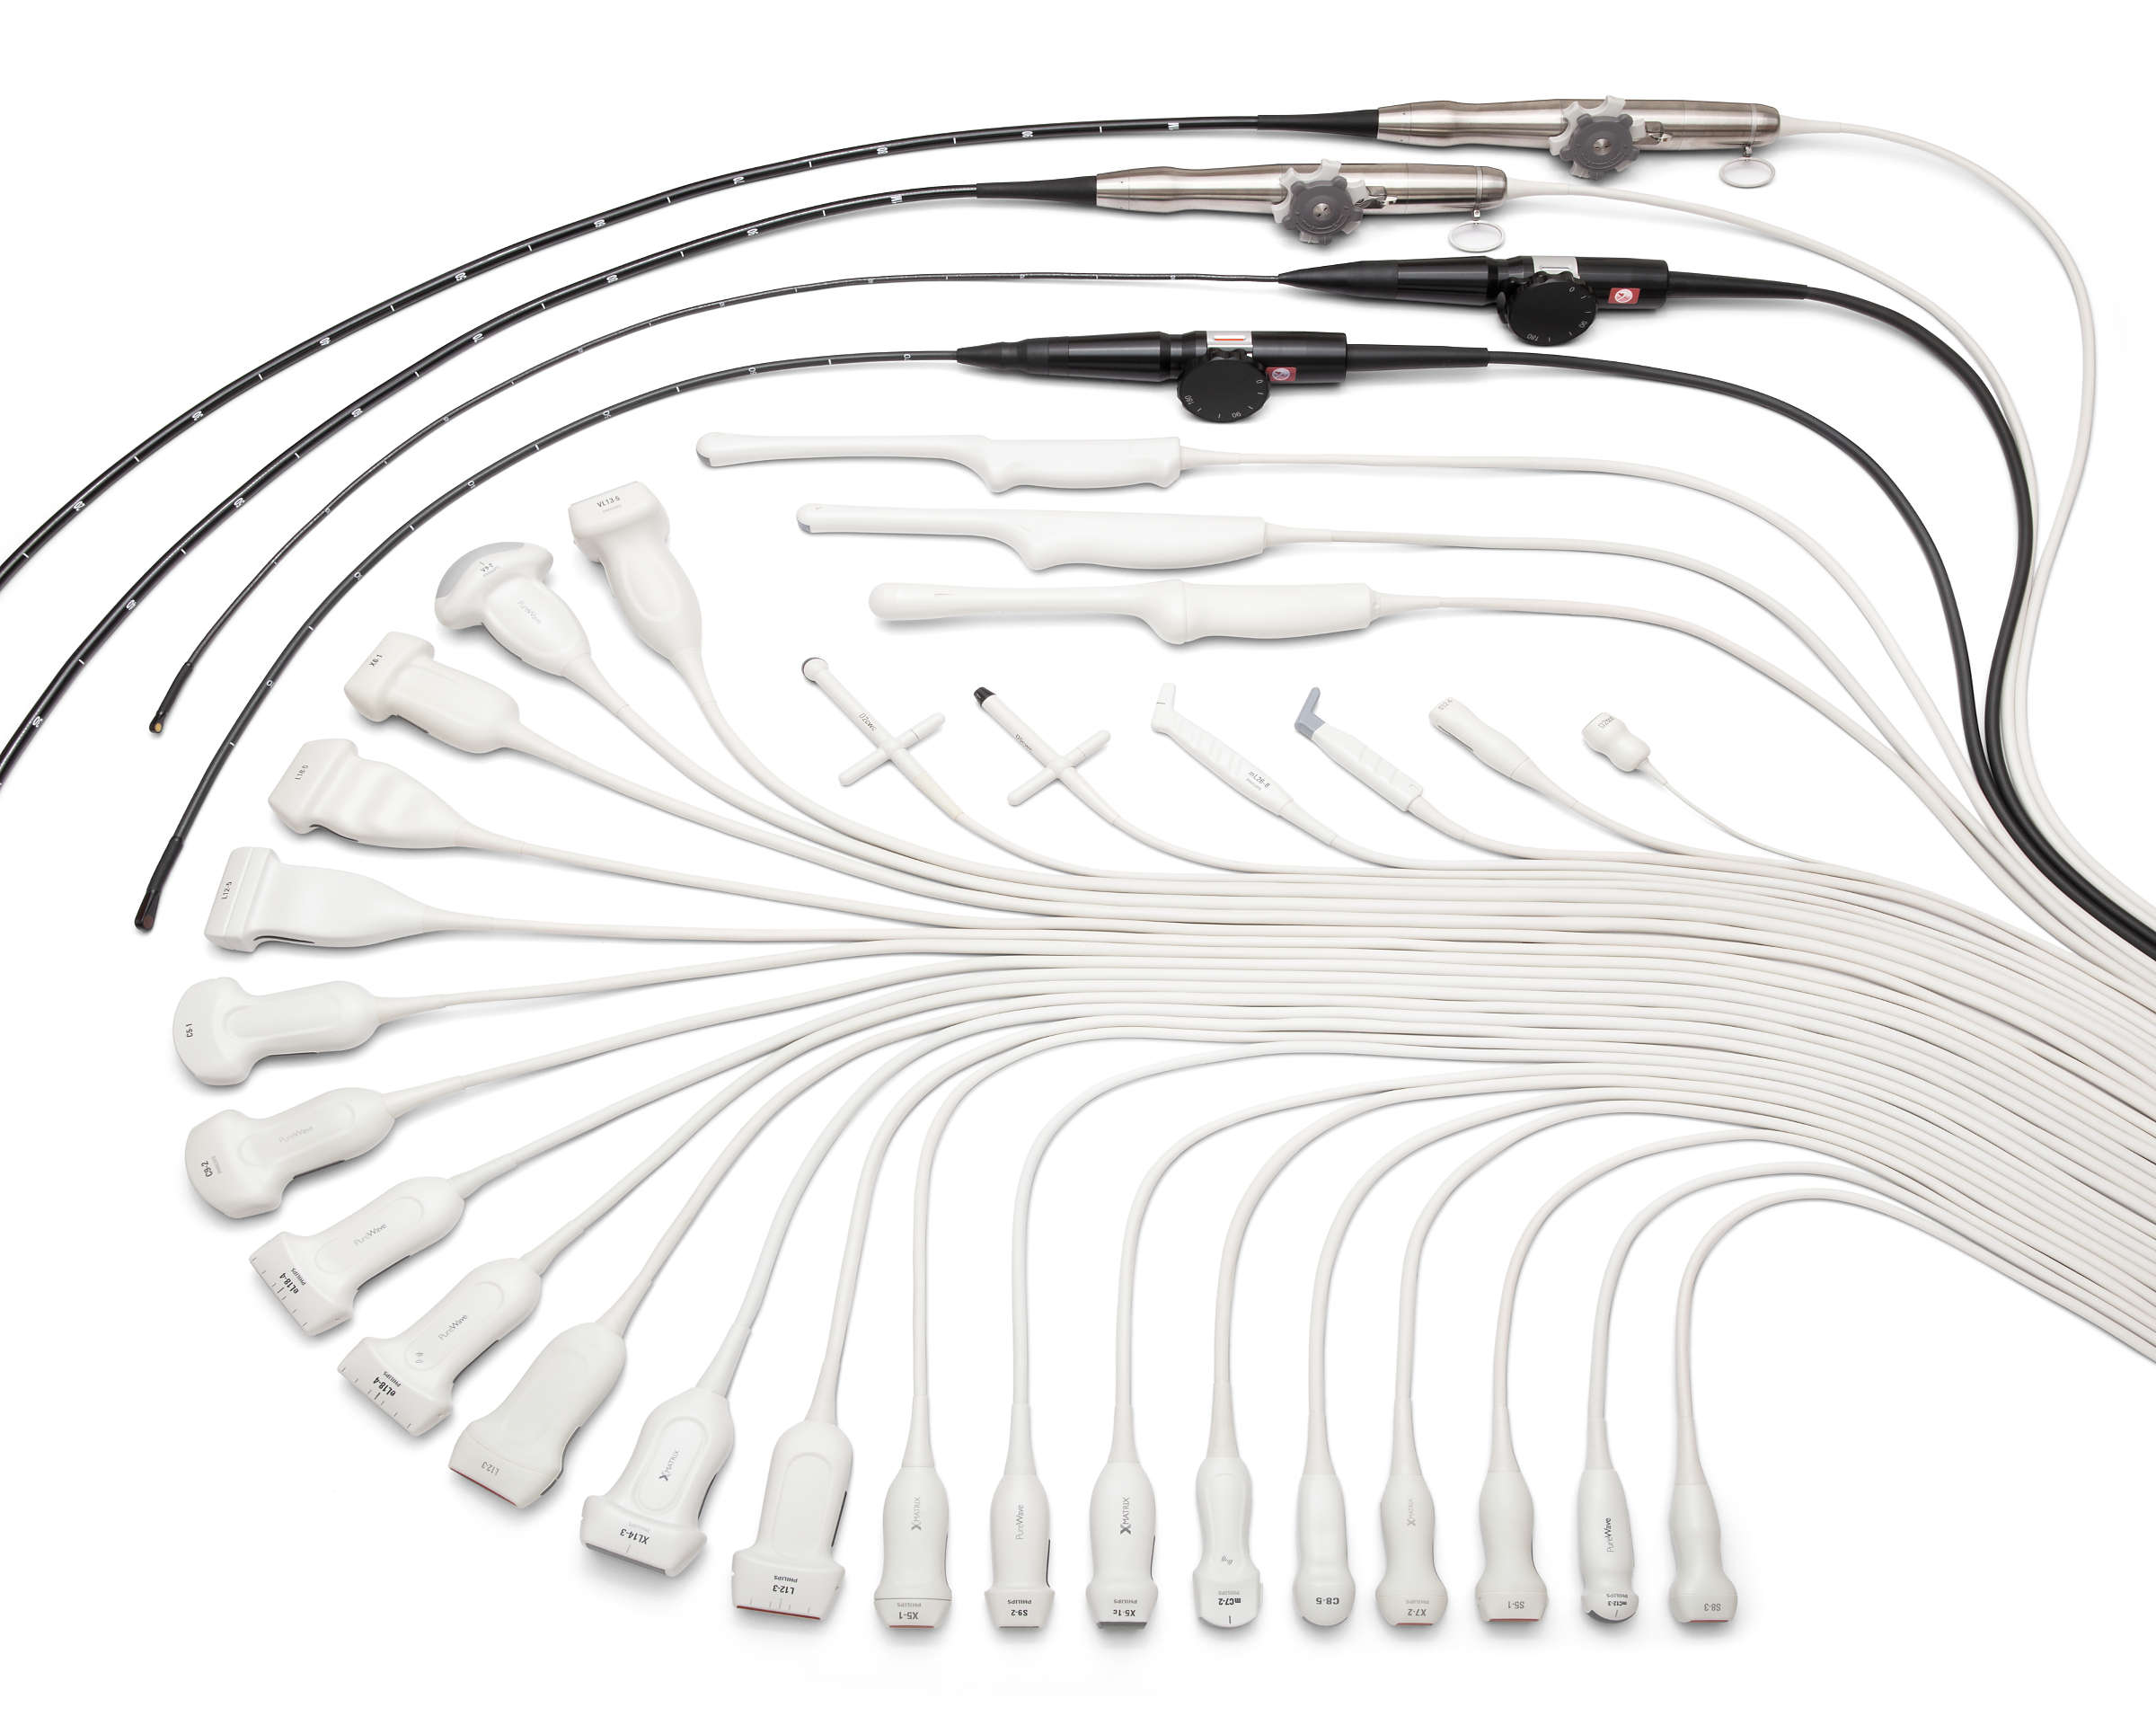 Photo of a range of different types of ultrasound transducers.